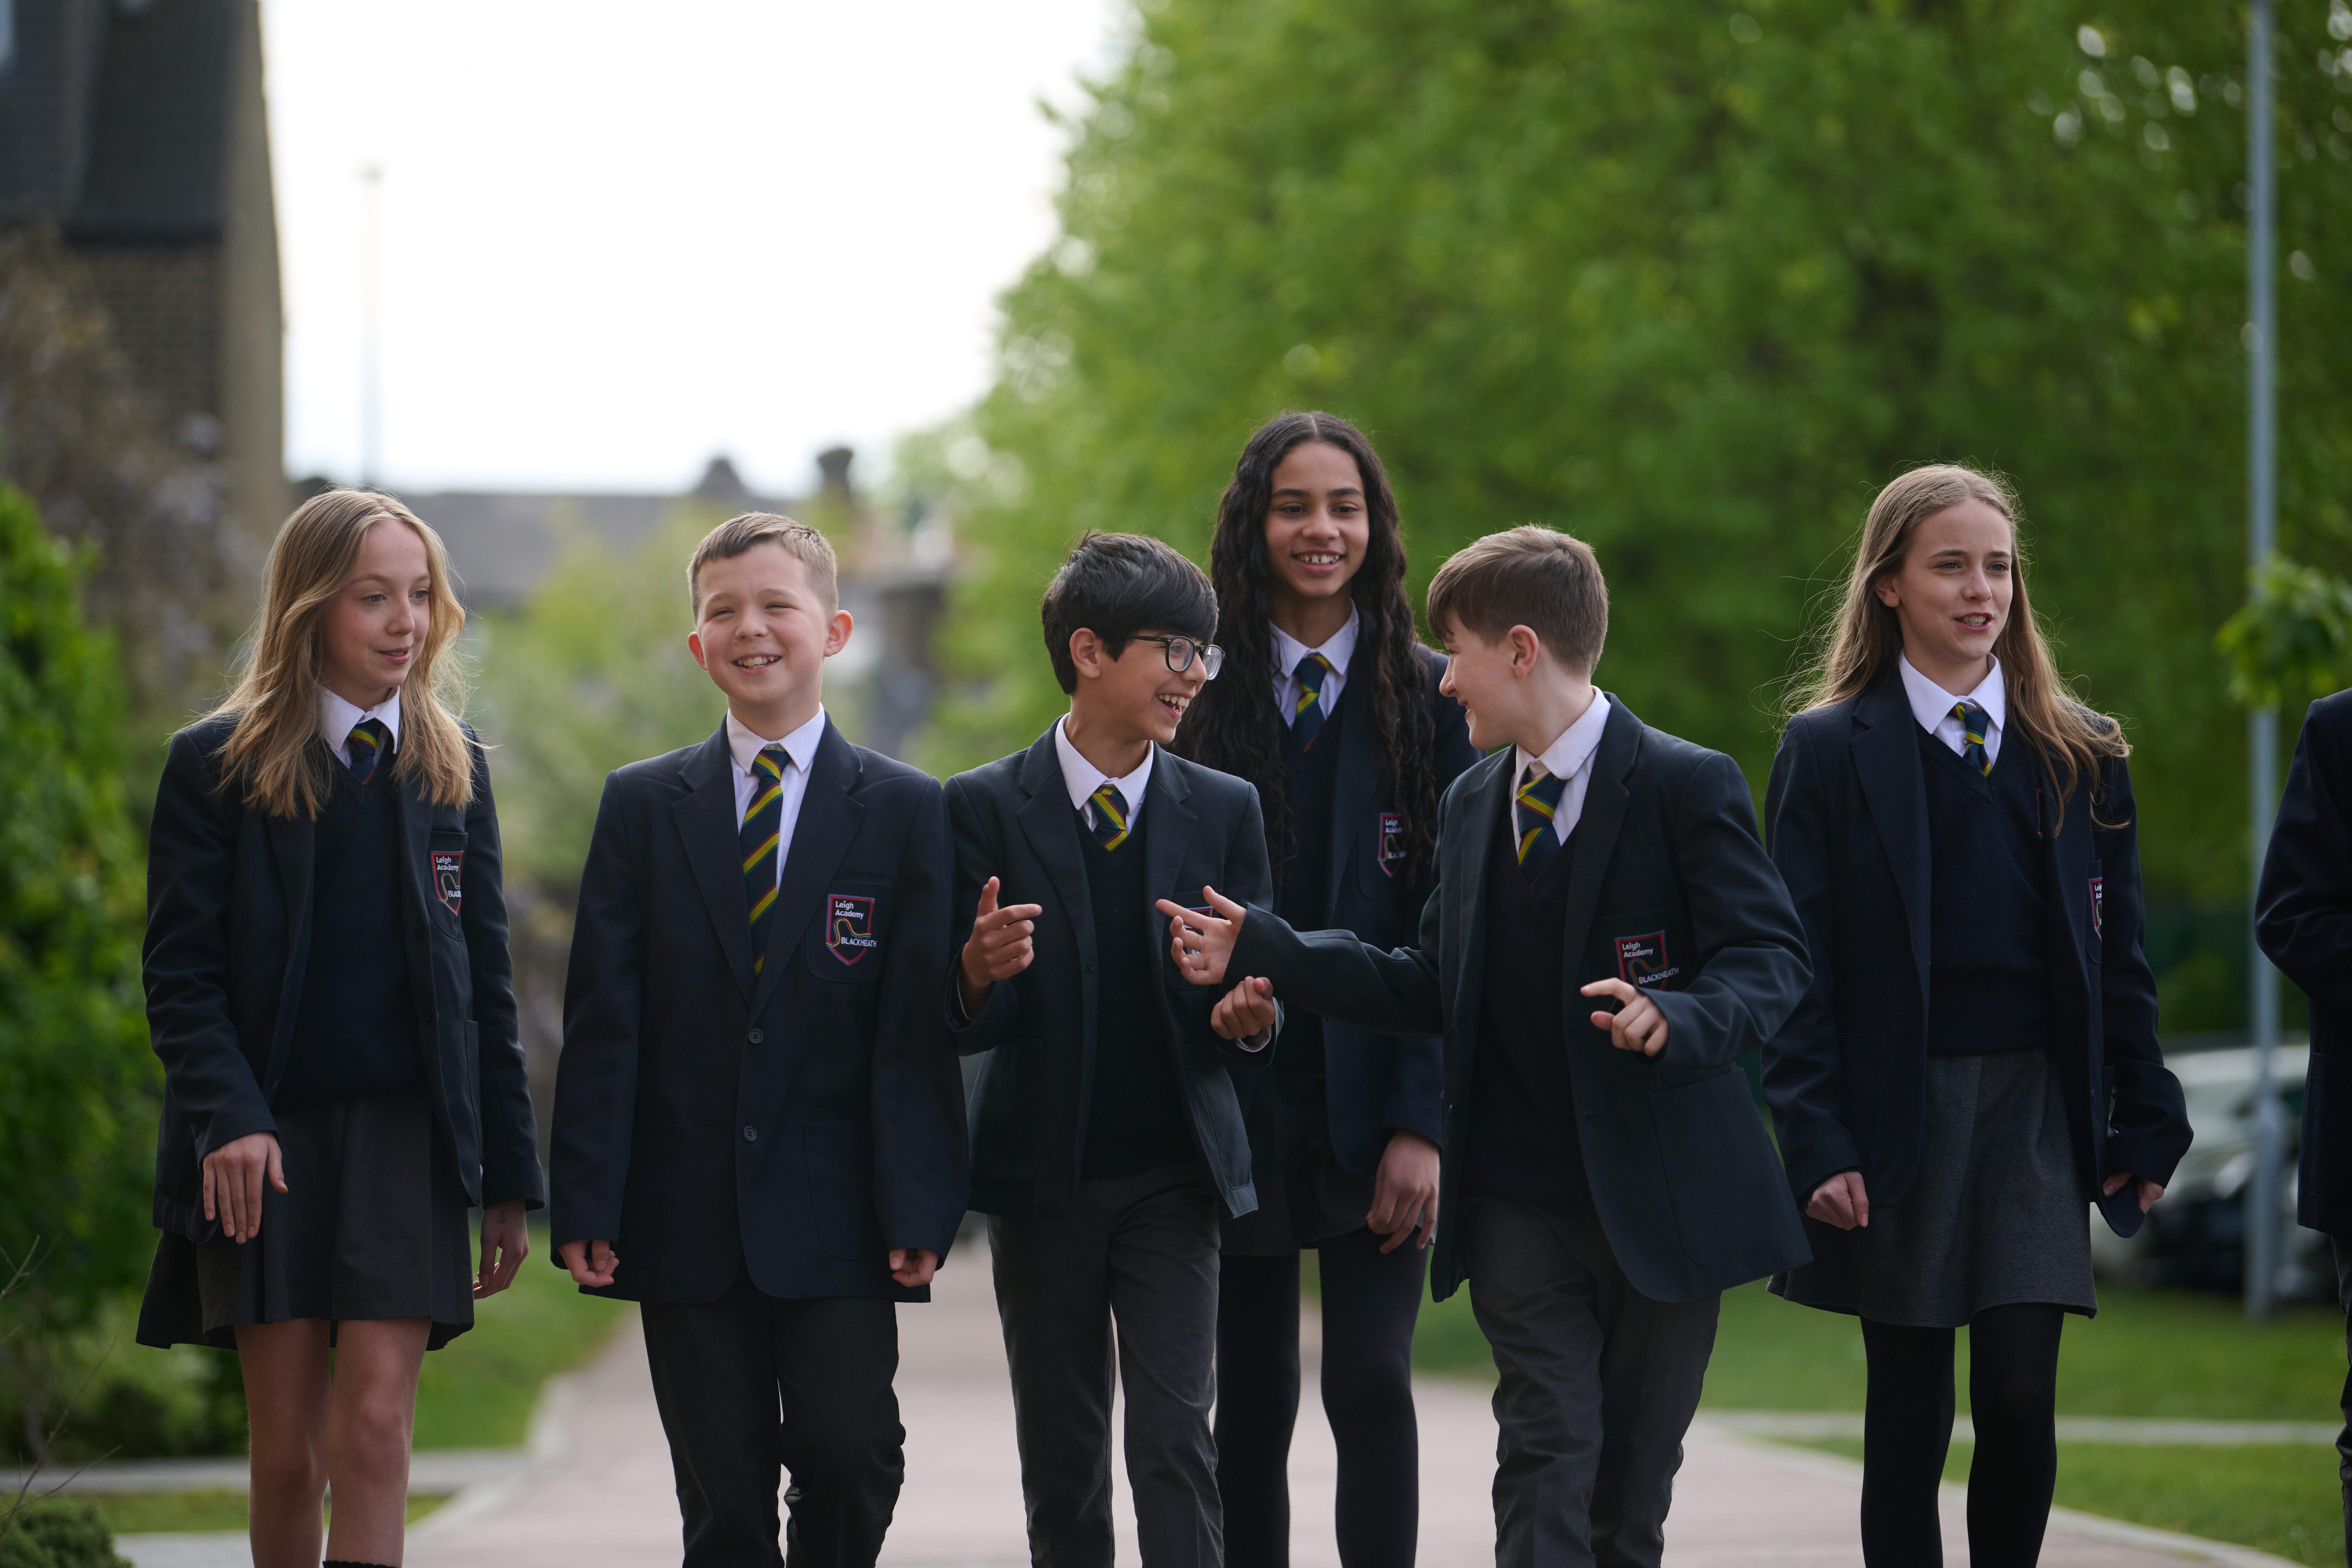 A group of students walking towards the camera, laughing and talking